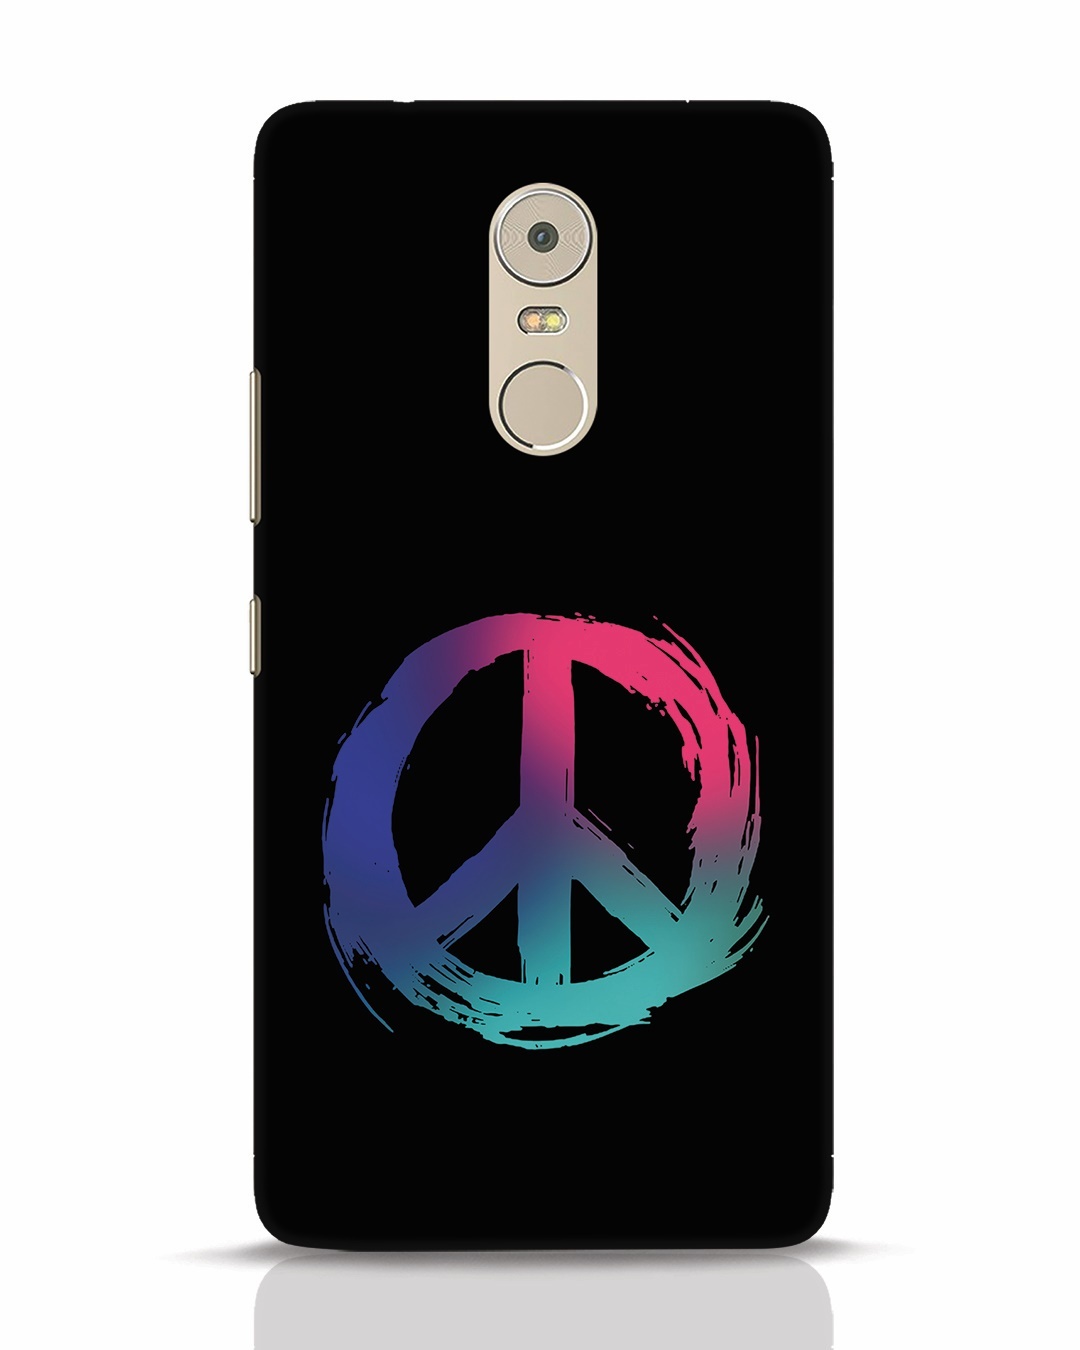 Colors Of Peace Lenovo K6 Note Mobile Cover Lenovo K6 Note Mobile Covers Bewakoof.com